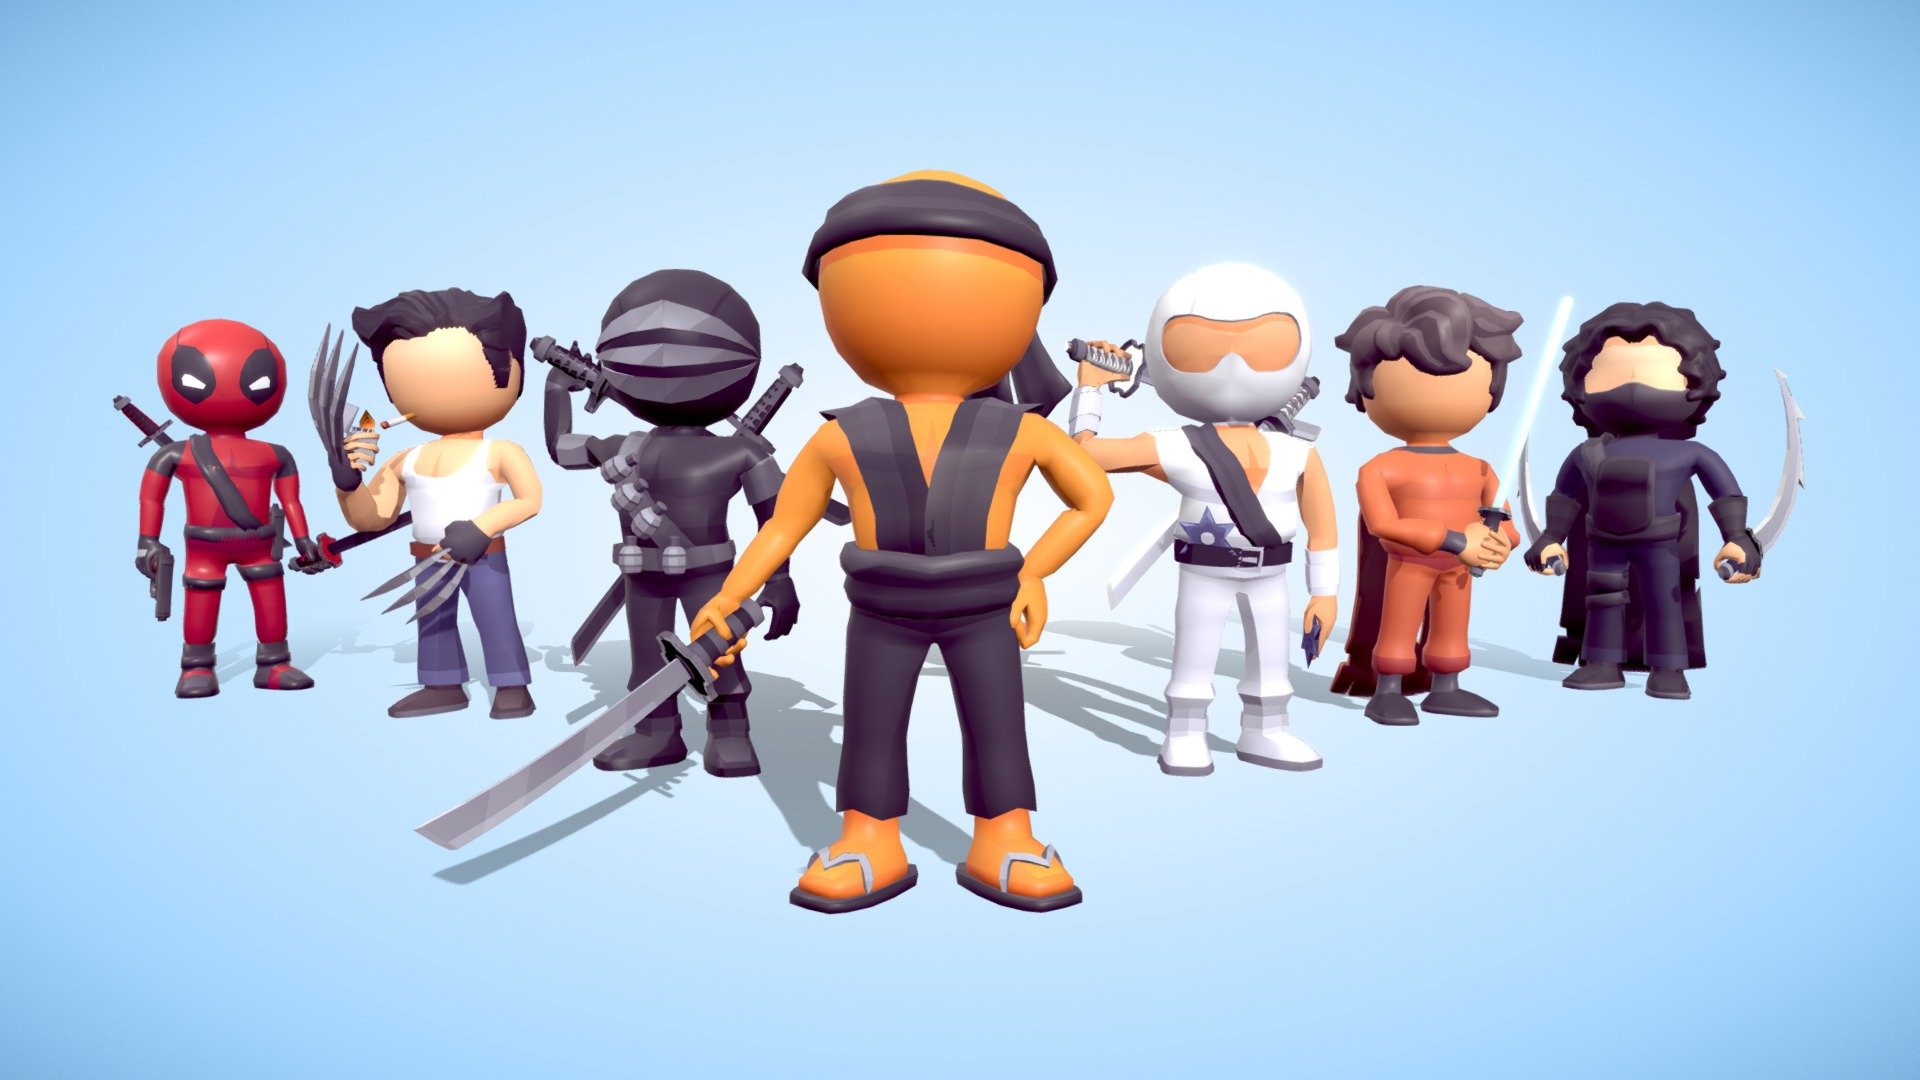 Lowpoly stickmans fighting characters
Done on blender with a single gradient map

For any special orders please contact me on my email adress:
Haykel.shaba.designer@gmail.com - Lowpoly stickman characters (stylized render) - 3D model by haykel-shaba (@haykel1993) 3d model